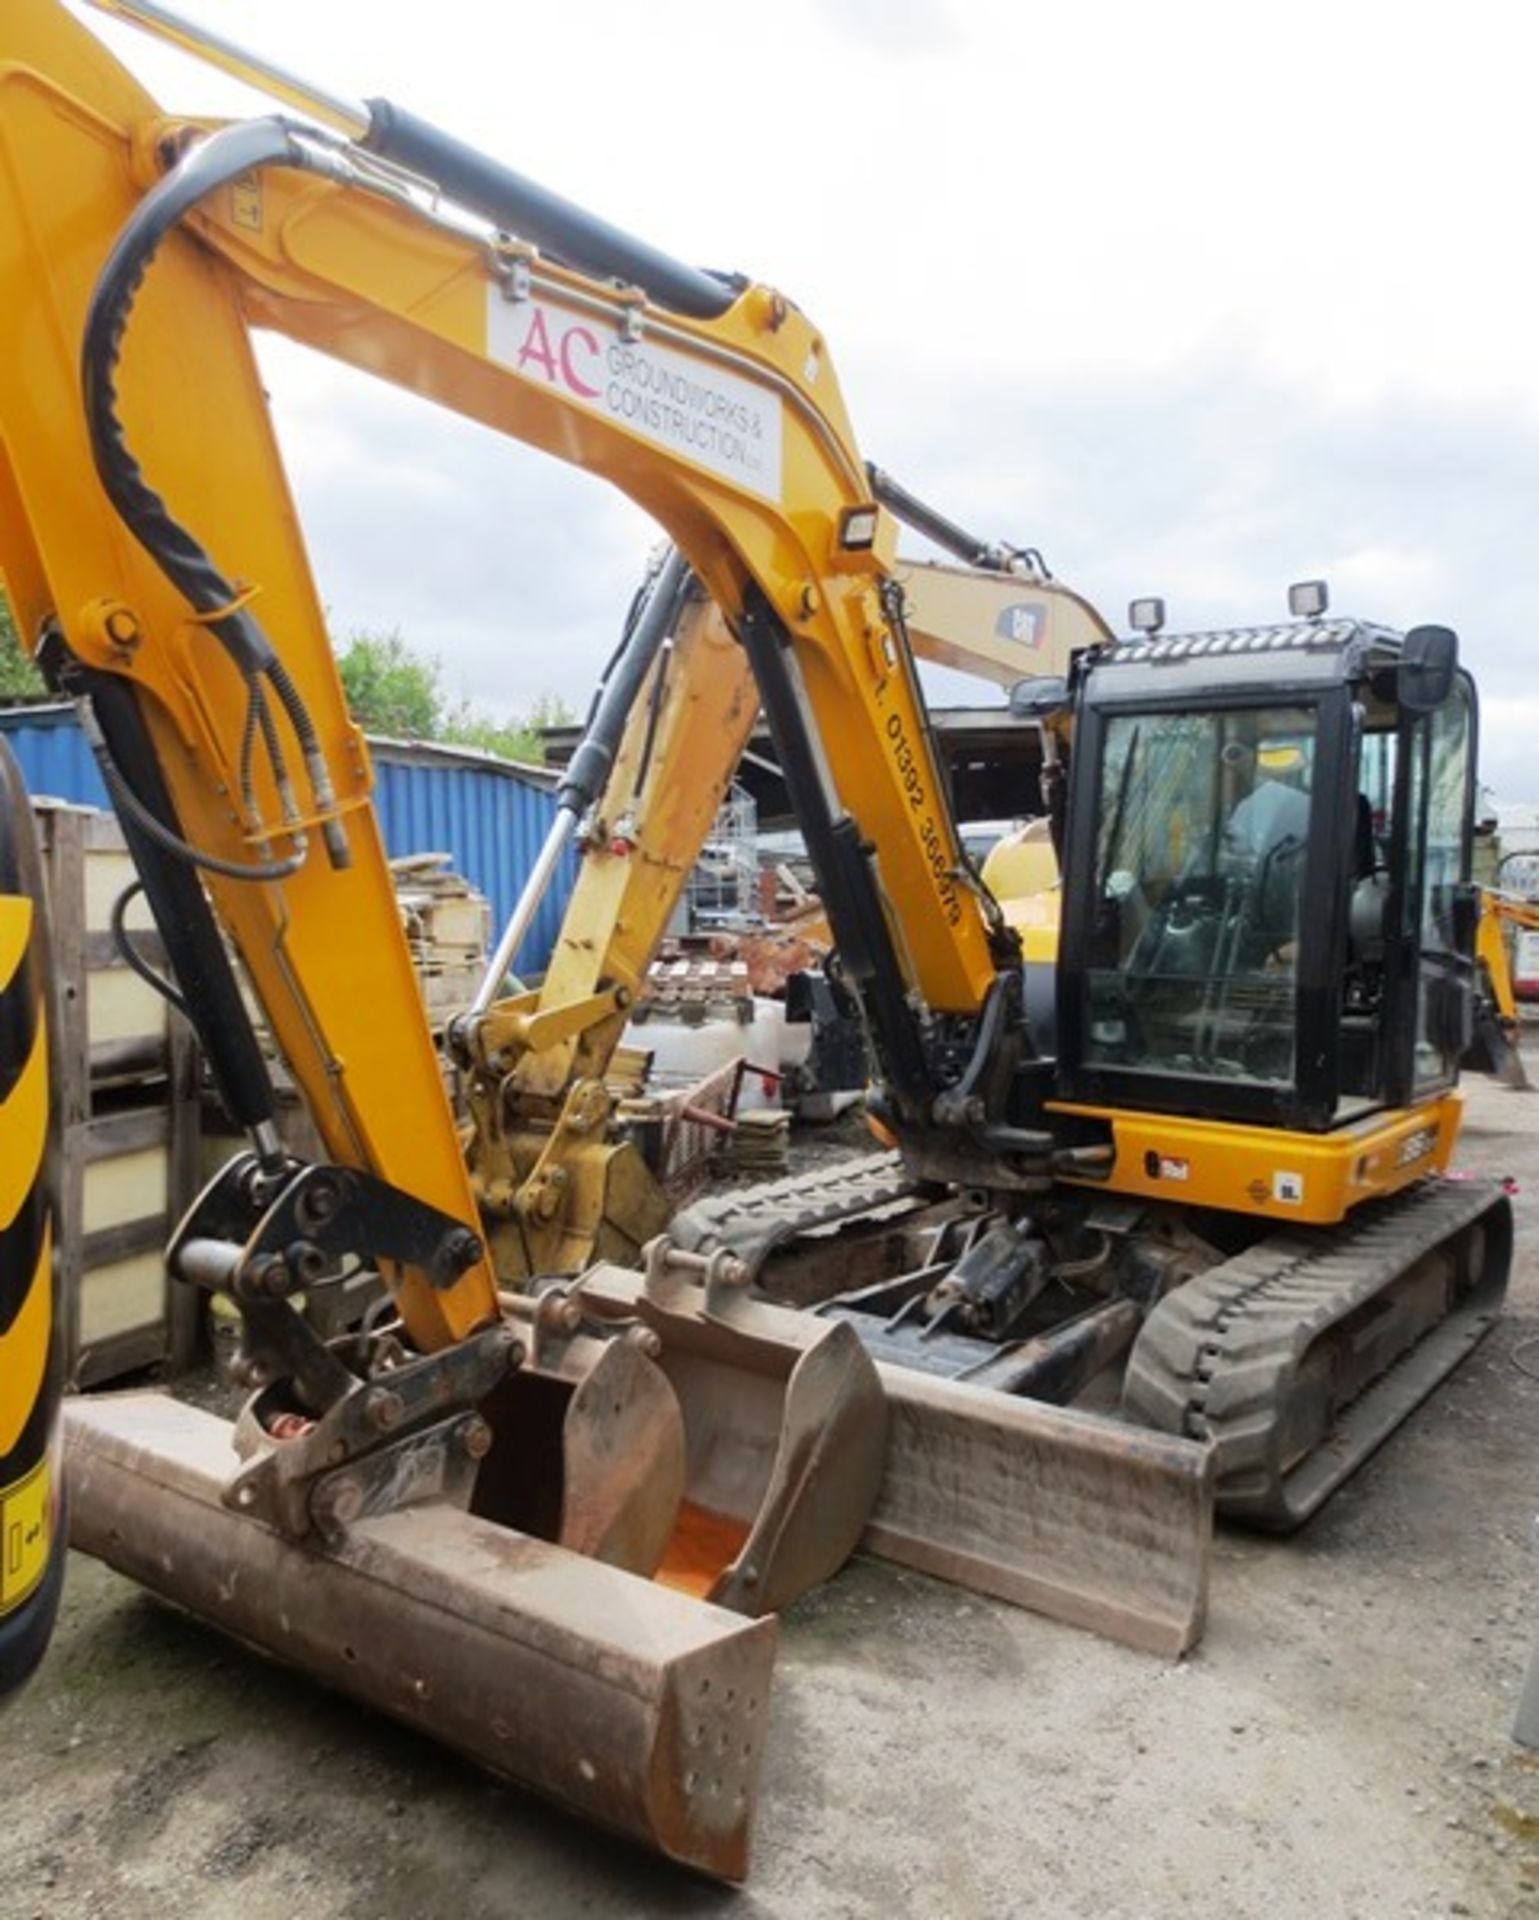 JCB 86C-1 rubber tracked midi hydraulic excavator with front dozer, product ID No: JCB086C1A02249723 - Image 4 of 19